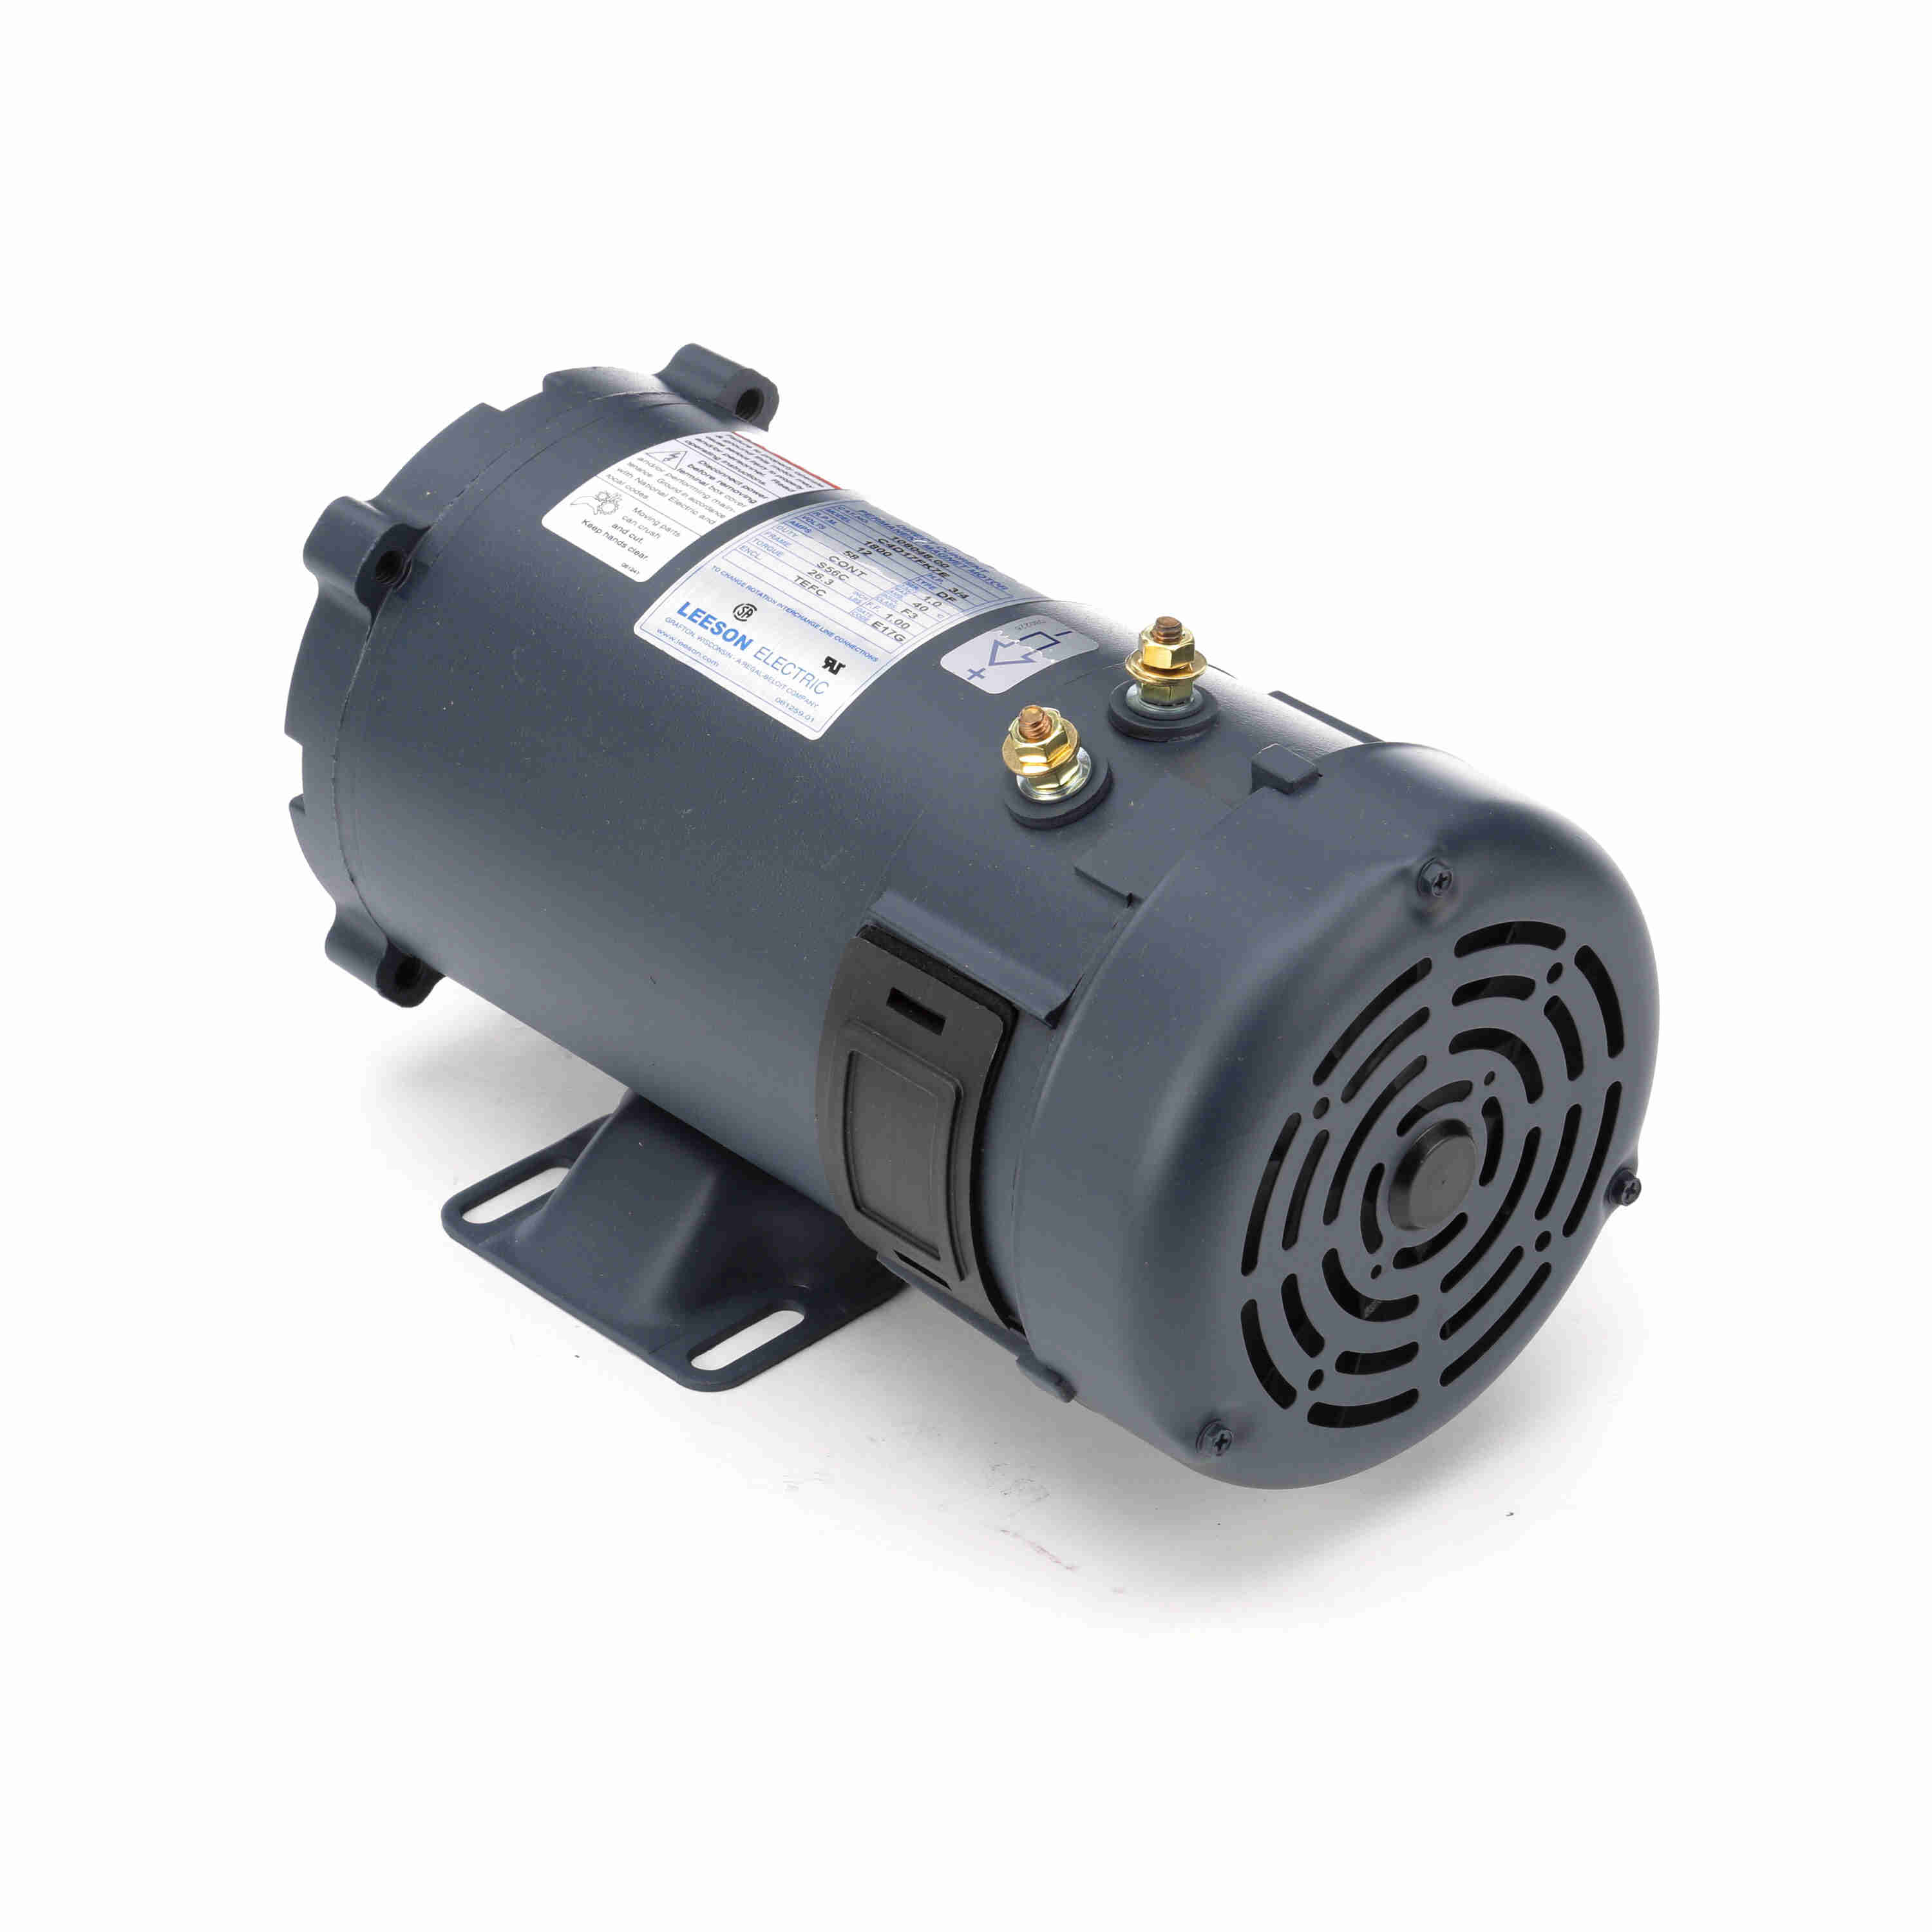 108048.00 Leeson 3/4HP Low Voltage DC Electric Motor, 1800RPM 2